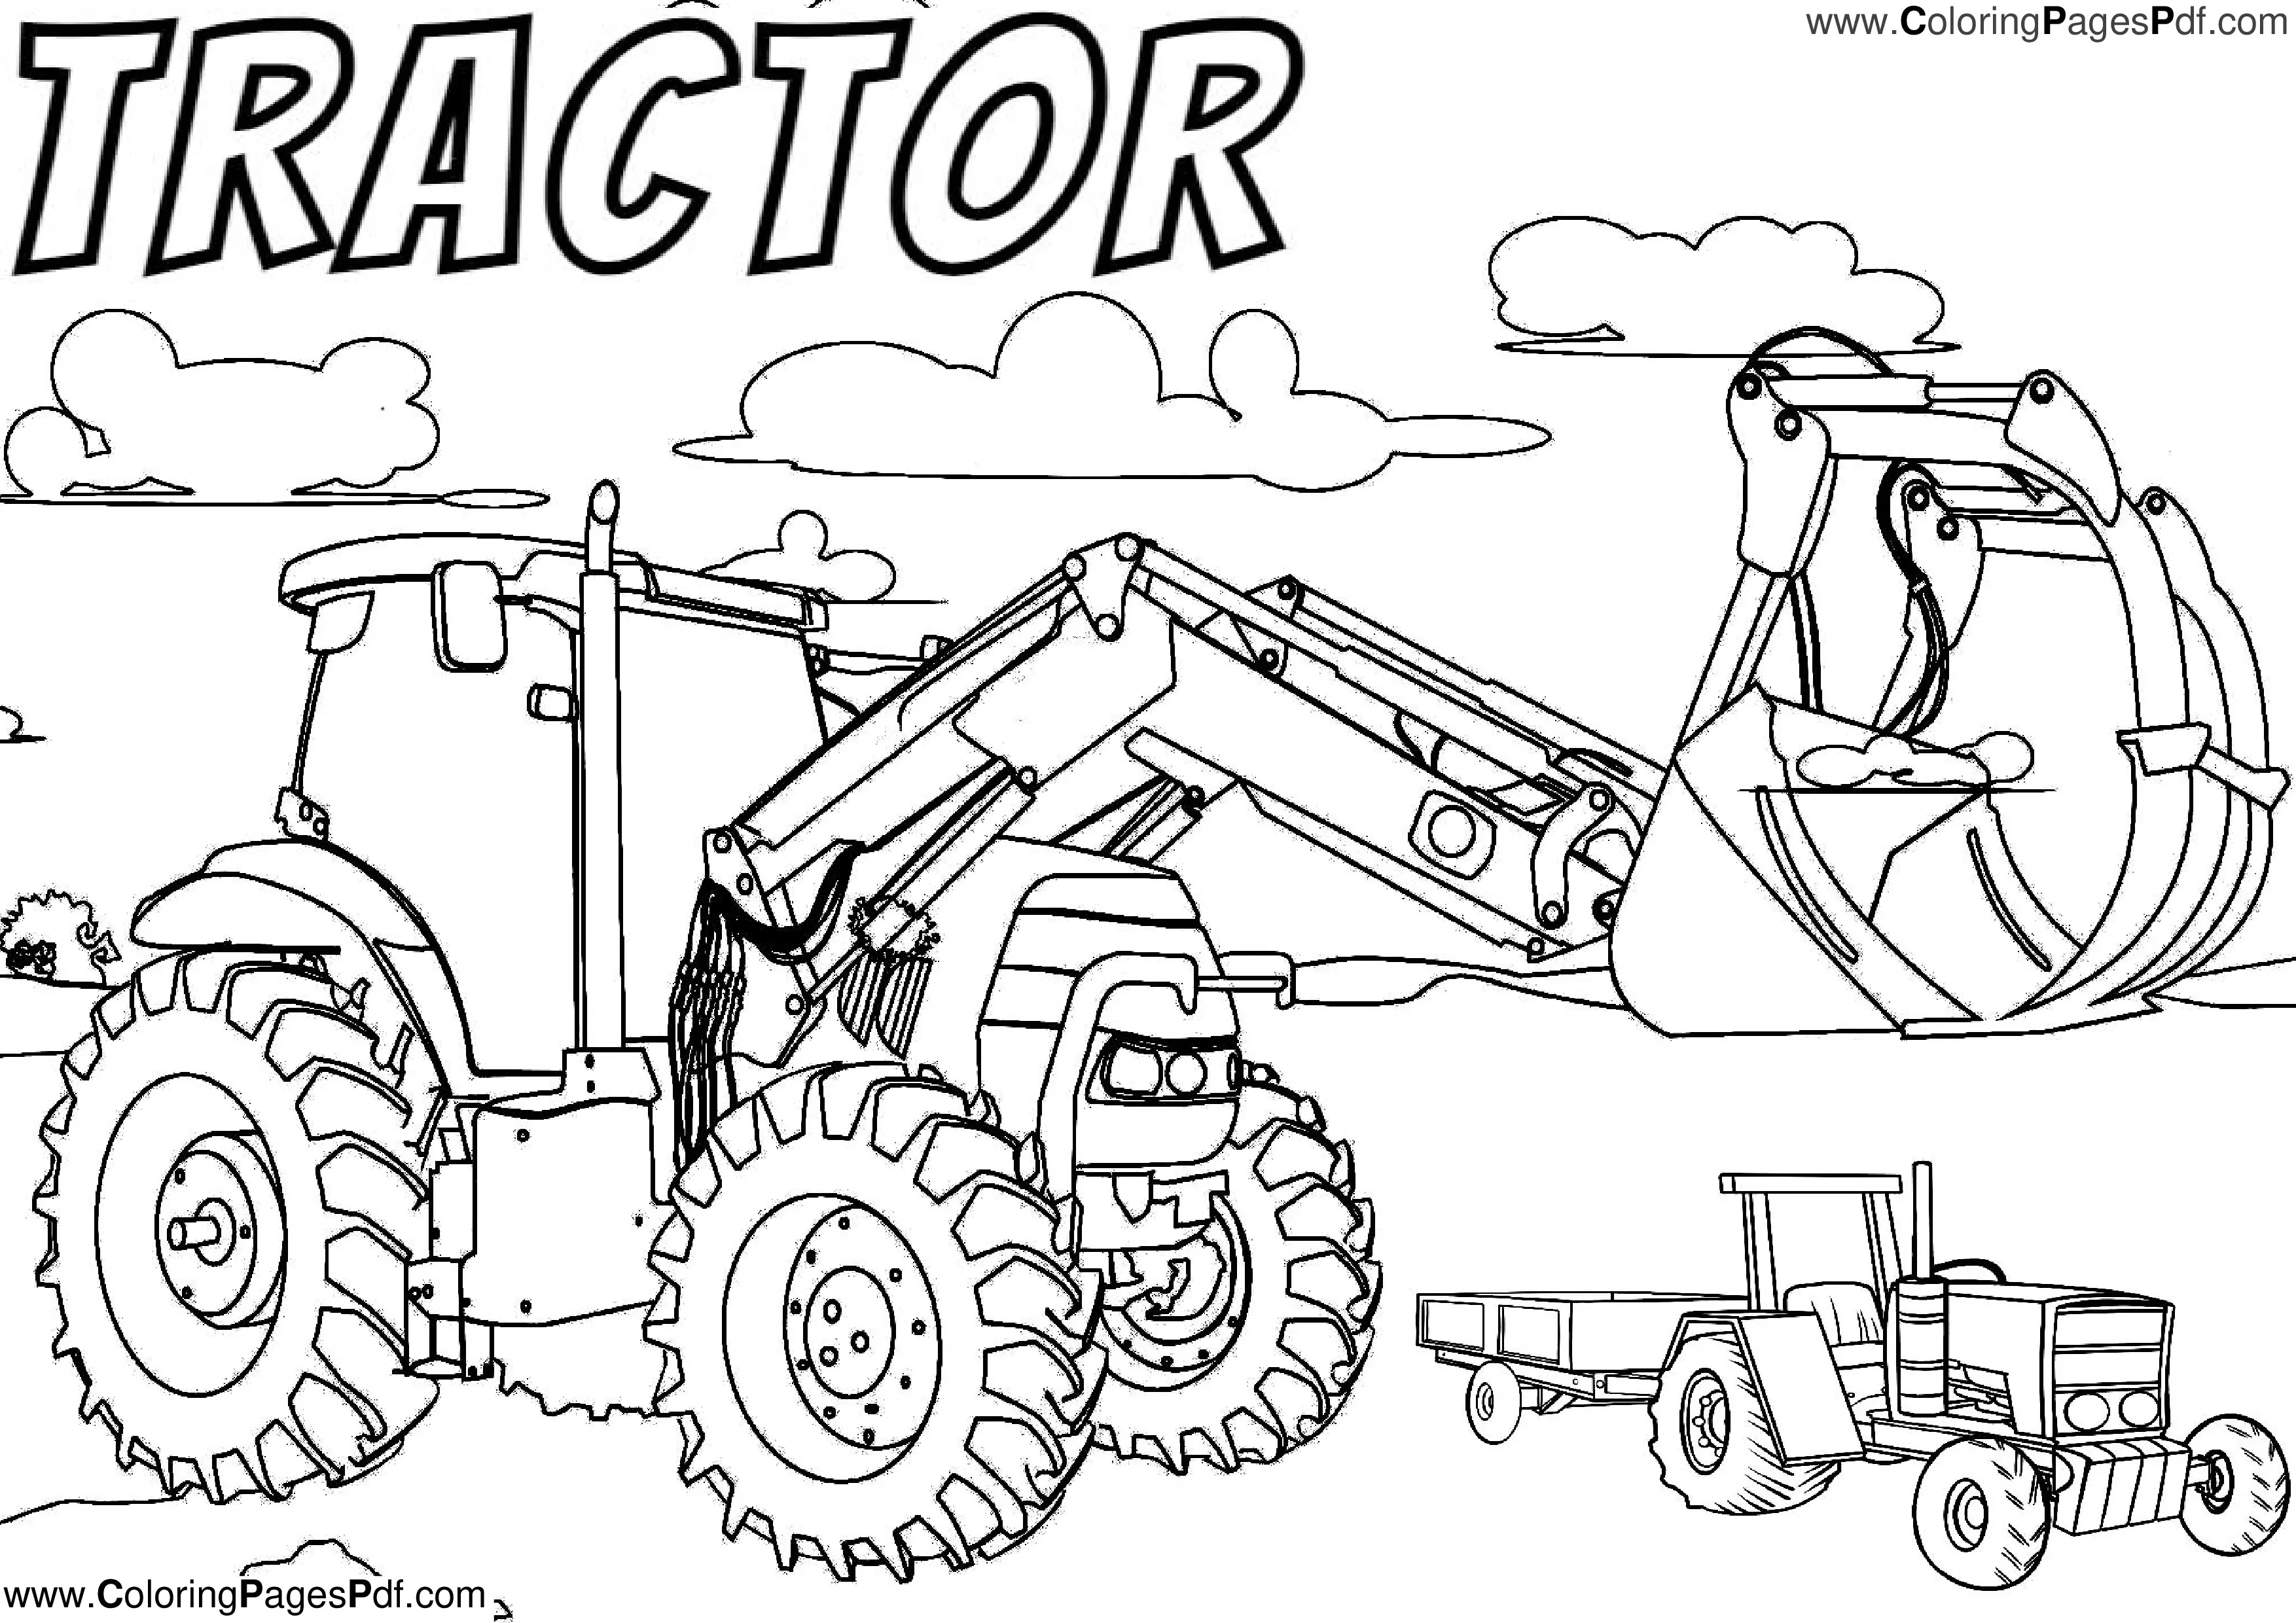 Tractor coloring pages for adults